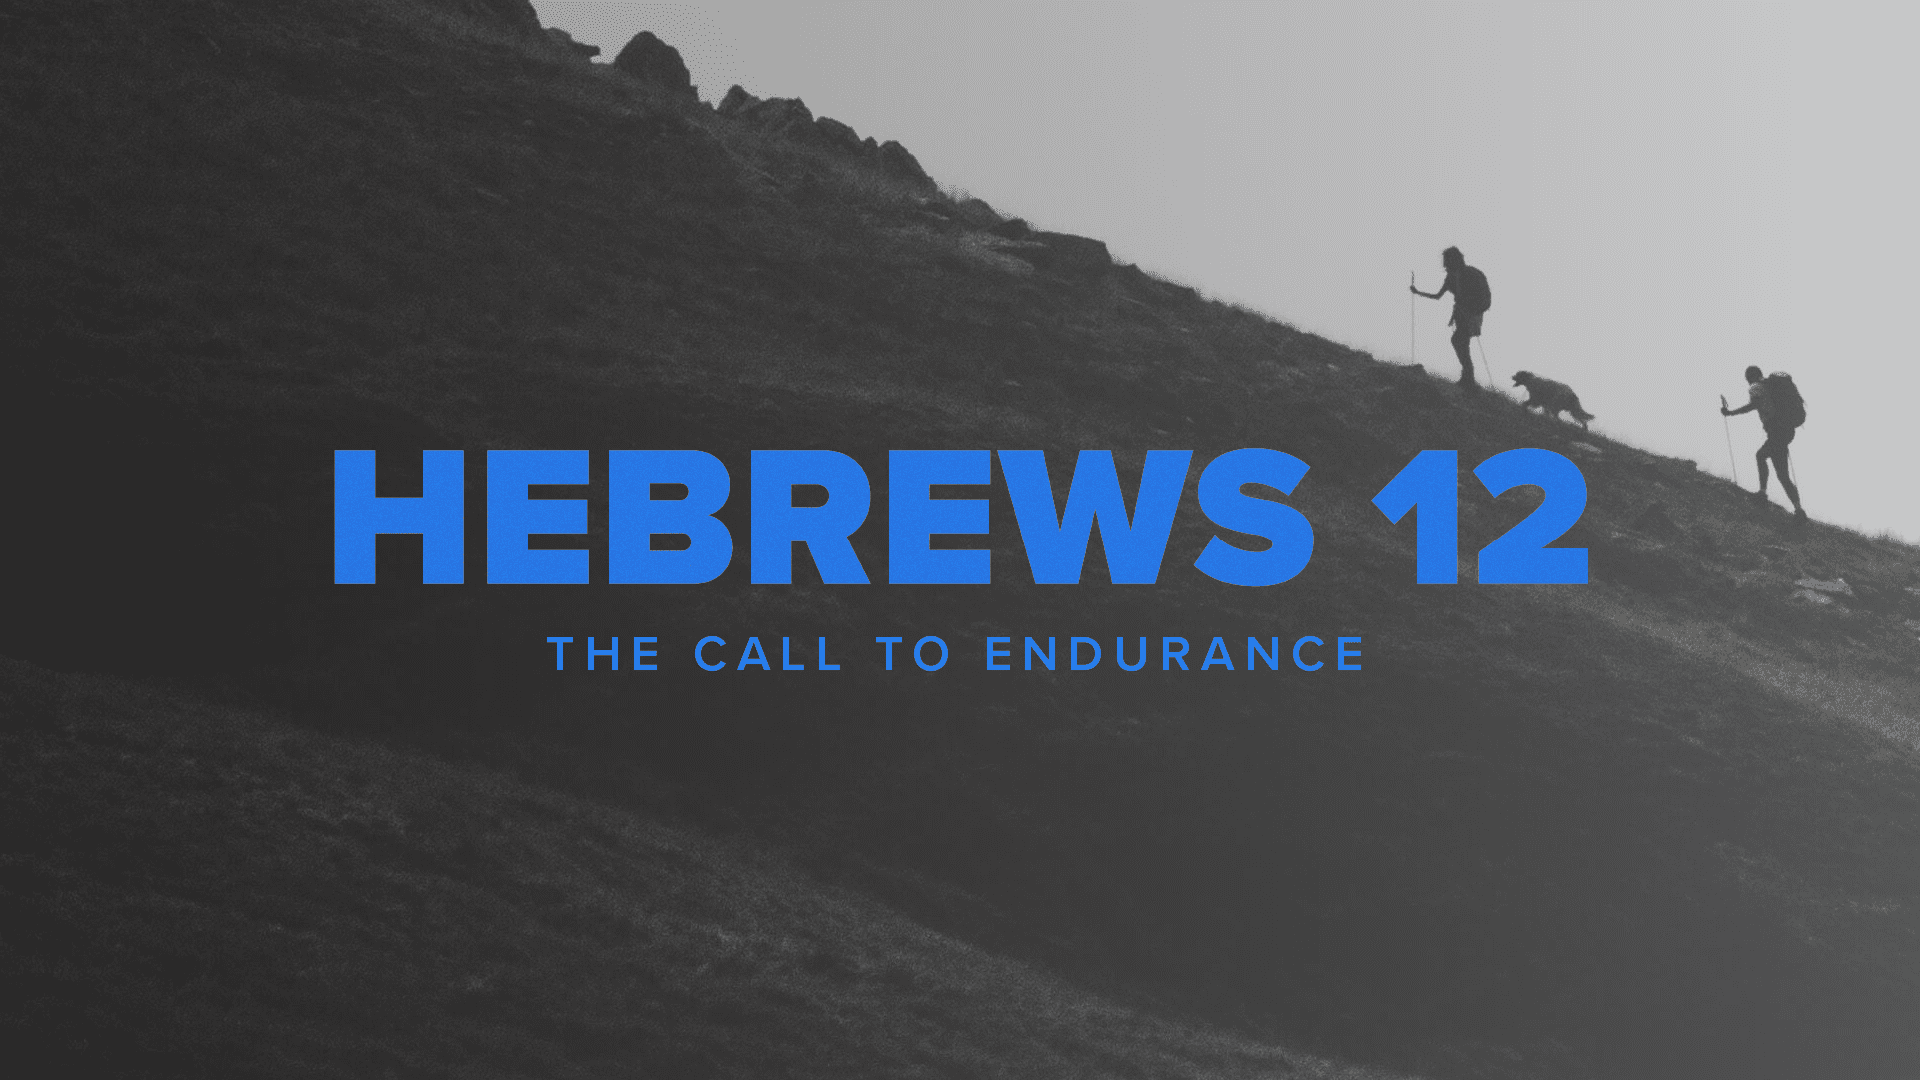 Hebrews 12: The Call to Endurance